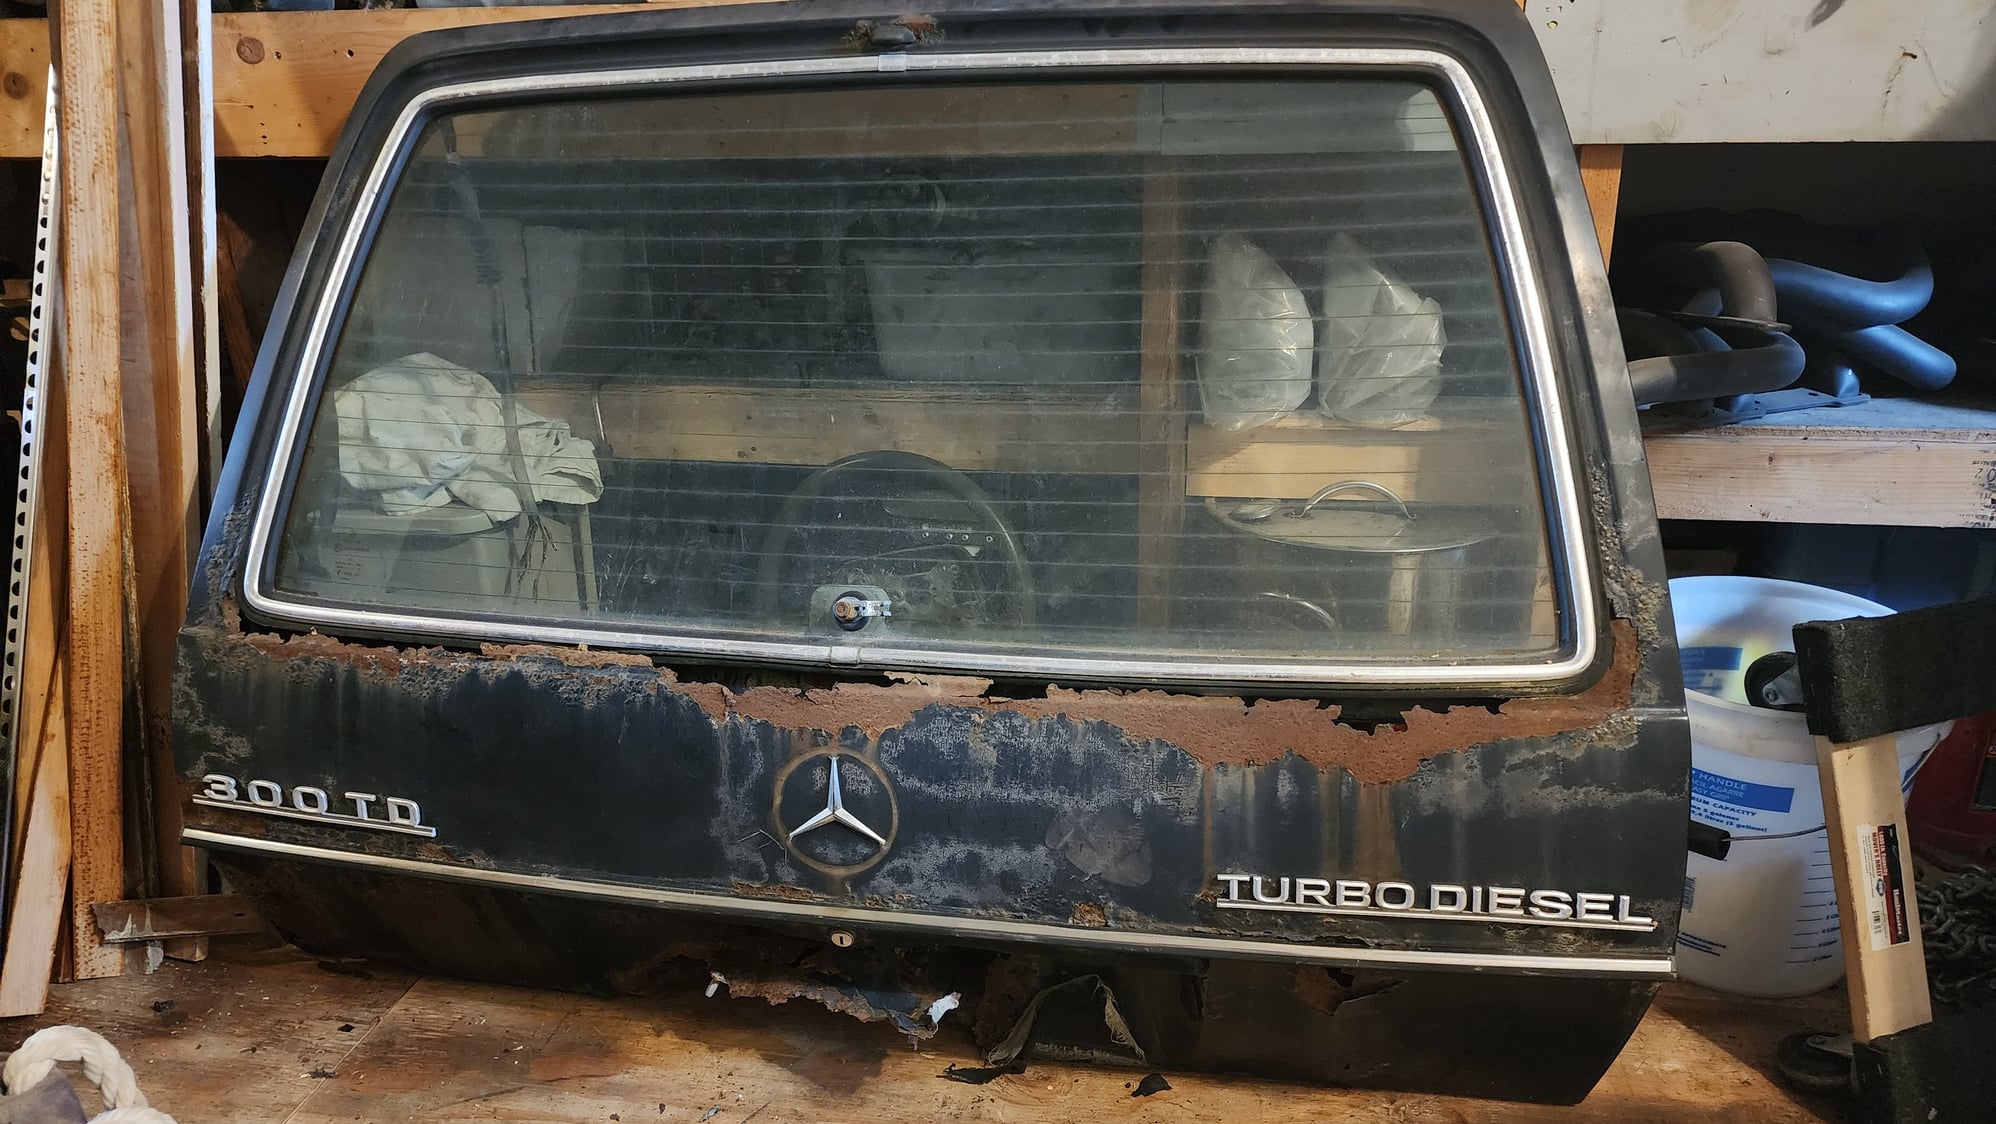 1983 Mercedes-Benz 300TD - Parts from scrapped wagon - Accessories - $1 - Joliet, IL 60435, United States